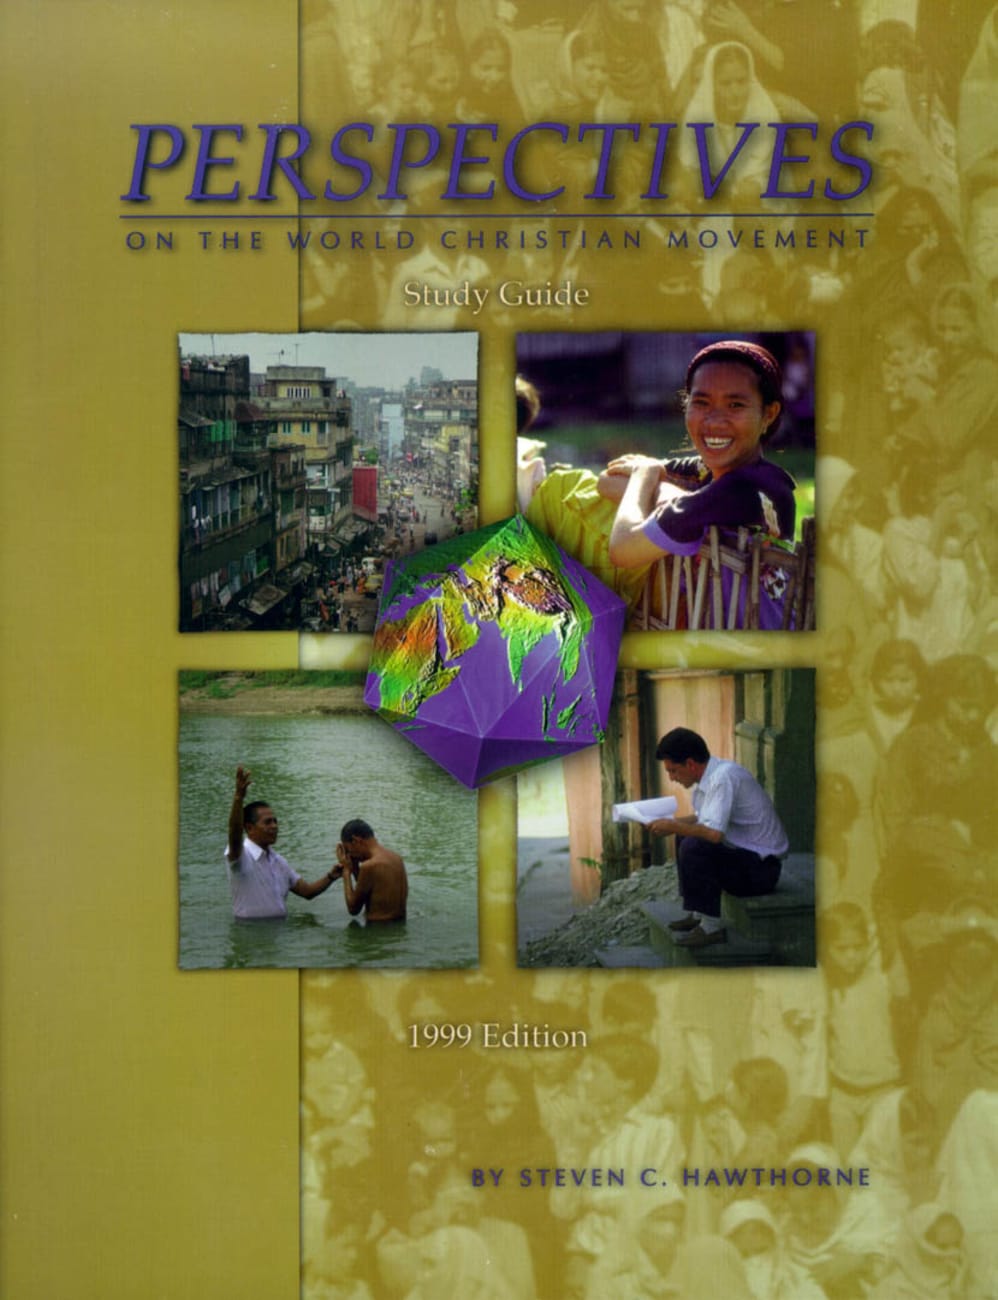 Study Guide Perspectives on the World Christian Movement (3rd Edition) Paperback